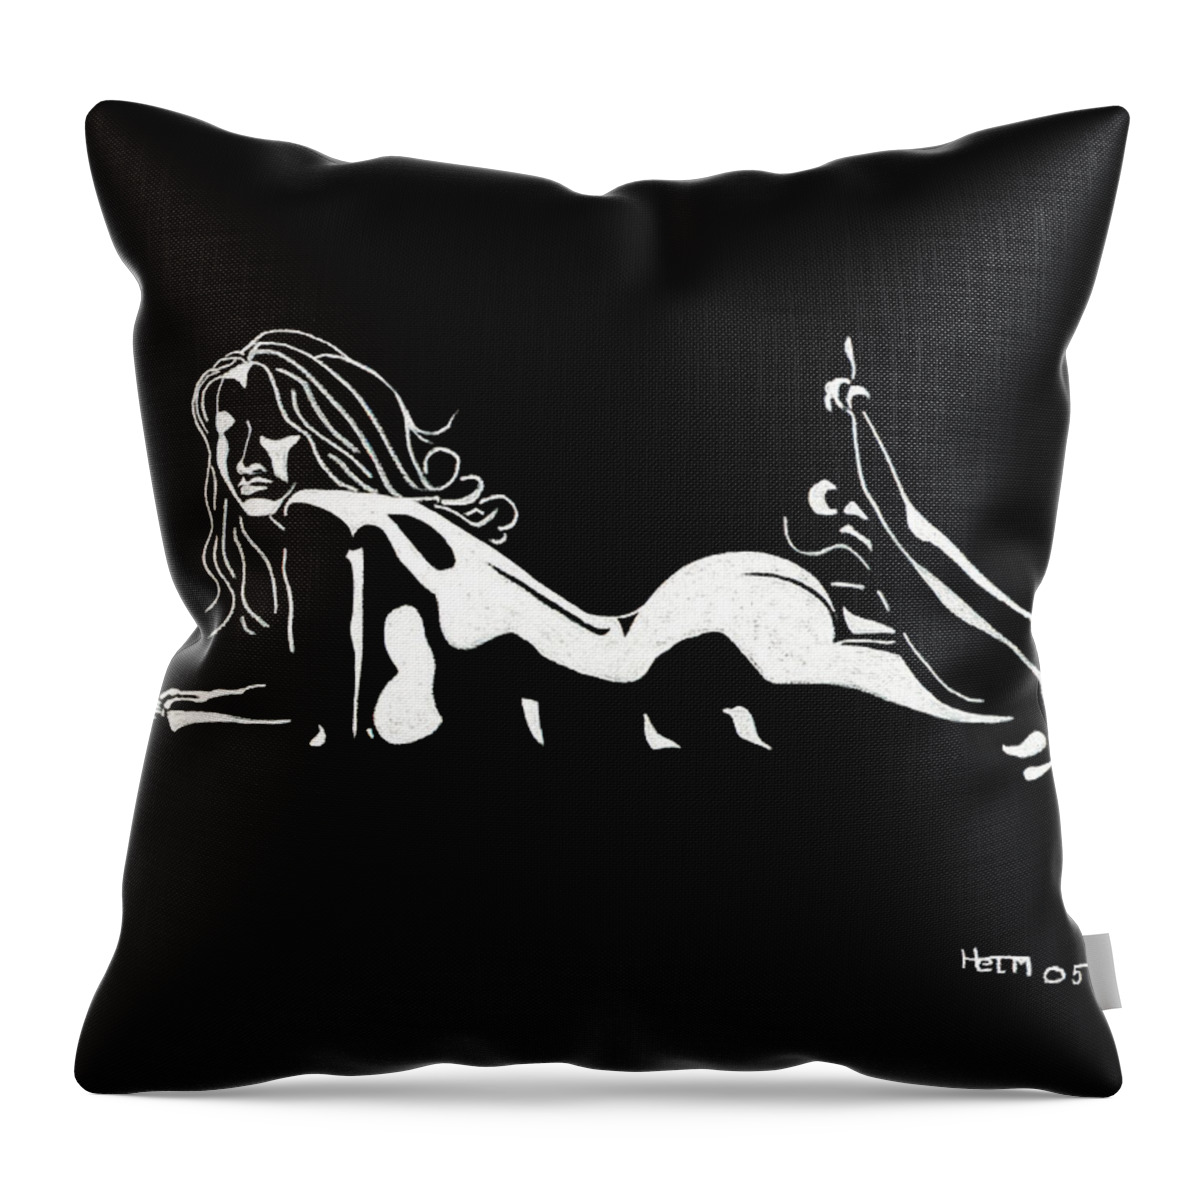  Sex Photographs Throw Pillow featuring the drawing Bad Girl by Mayhem Mediums